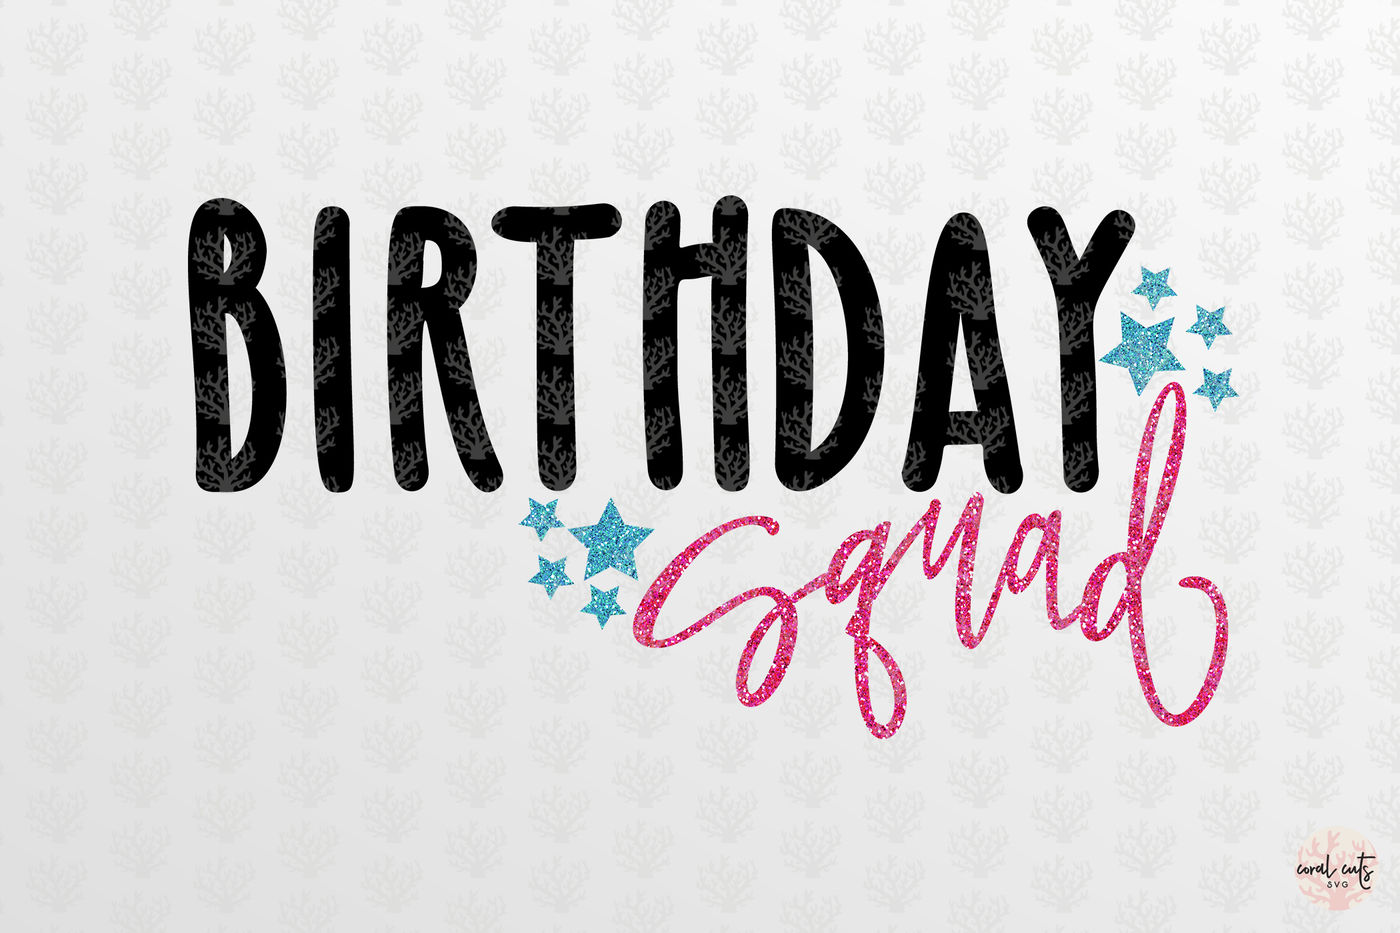 Download Birthday Squad - Birthday SVG EPS DXF PNG By CoralCuts ...